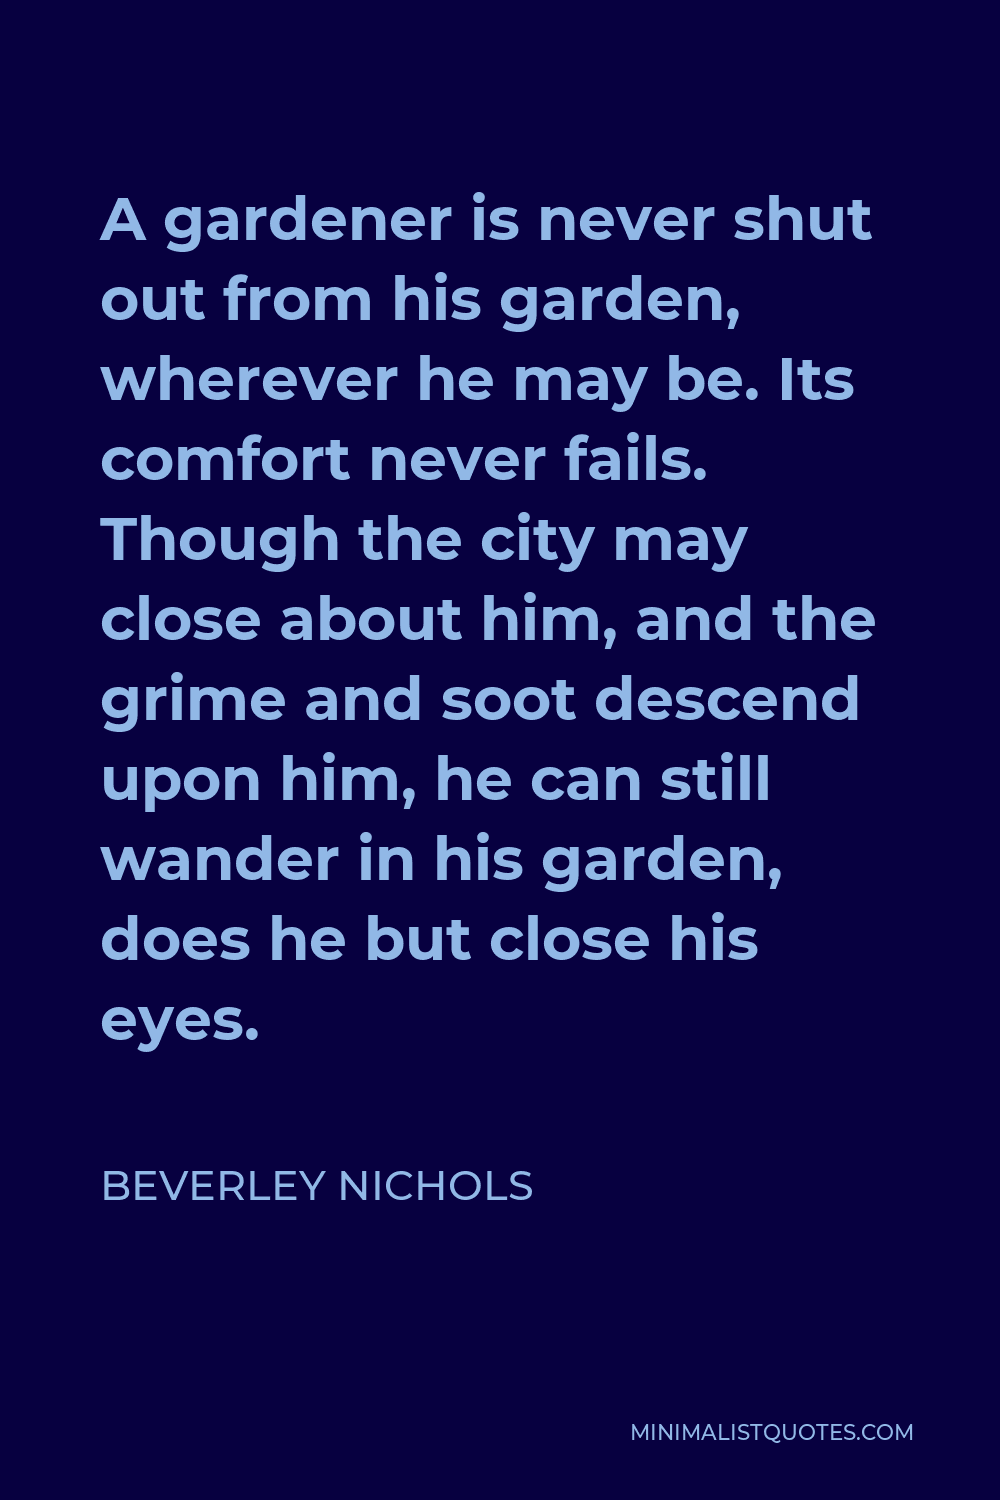 Beverley Nichols Quote - A gardener is never shut out from his garden, wherever he may be. Its comfort never fails. Though the city may close about him, and the grime and soot descend upon him, he can still wander in his garden, does he but close his eyes.